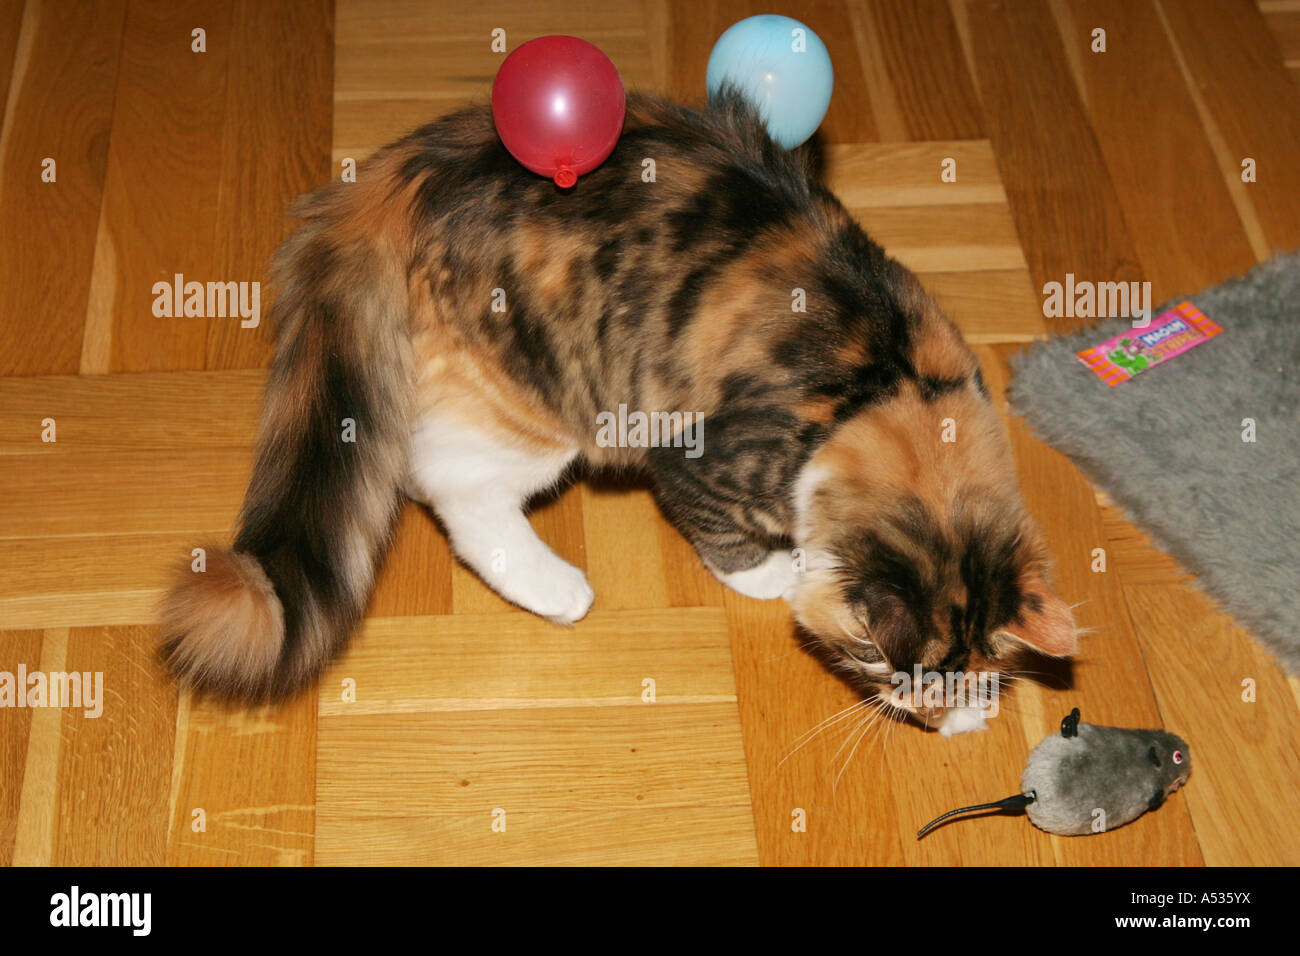 Static electricity is holding the two small balloons in the fur of the kitten Stock Photo